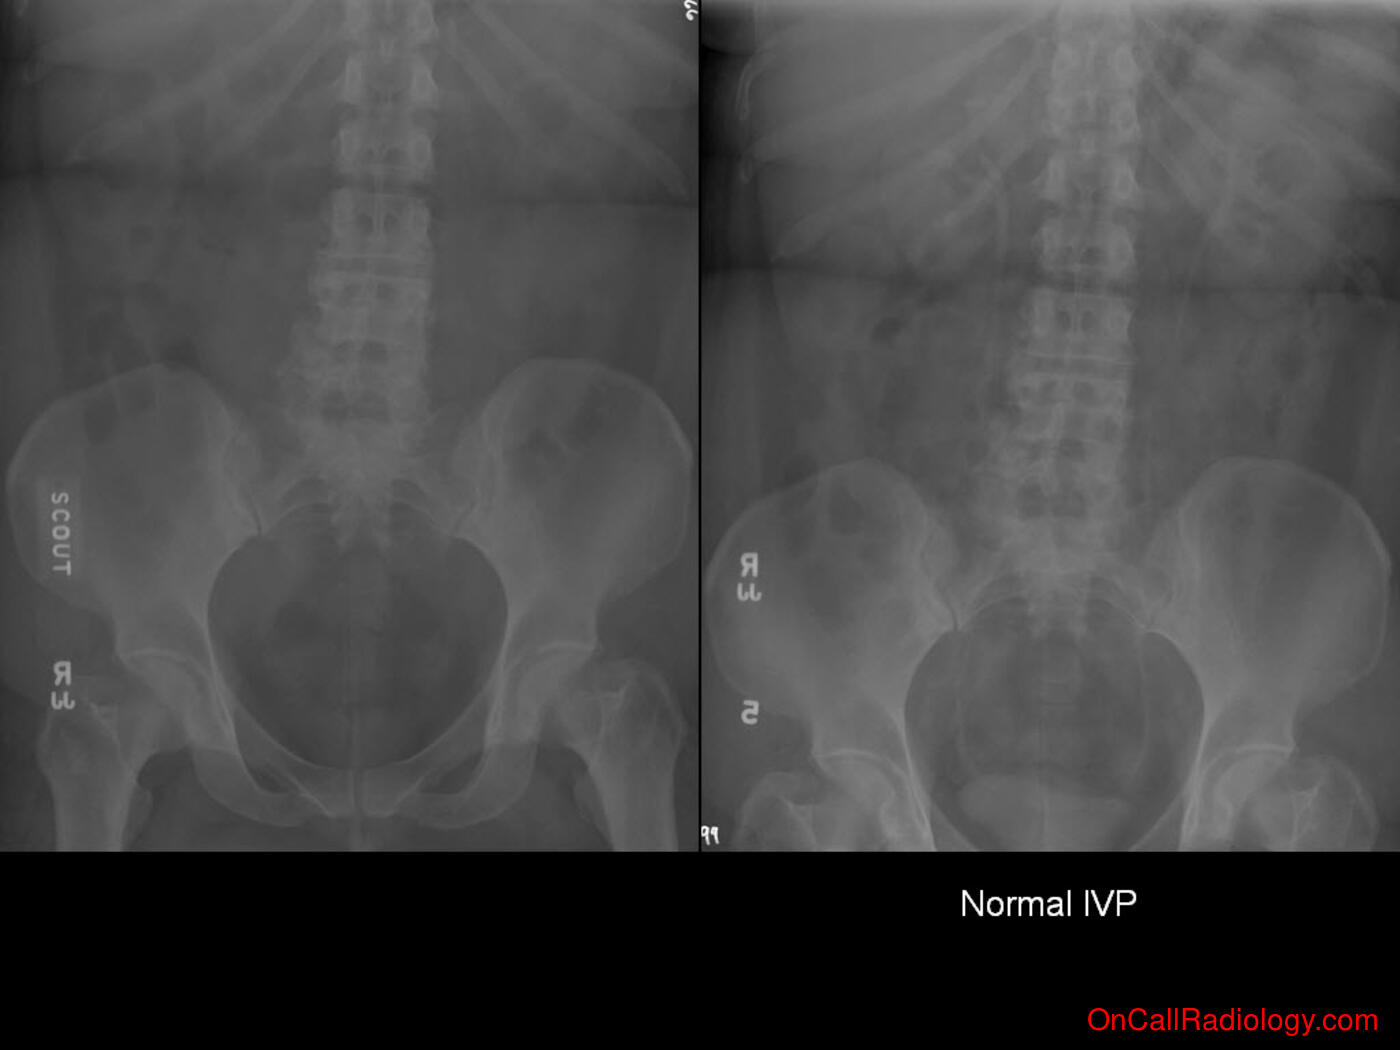 Technique (Normal KUB and IVP - Plain film, Radiograph, IVP)